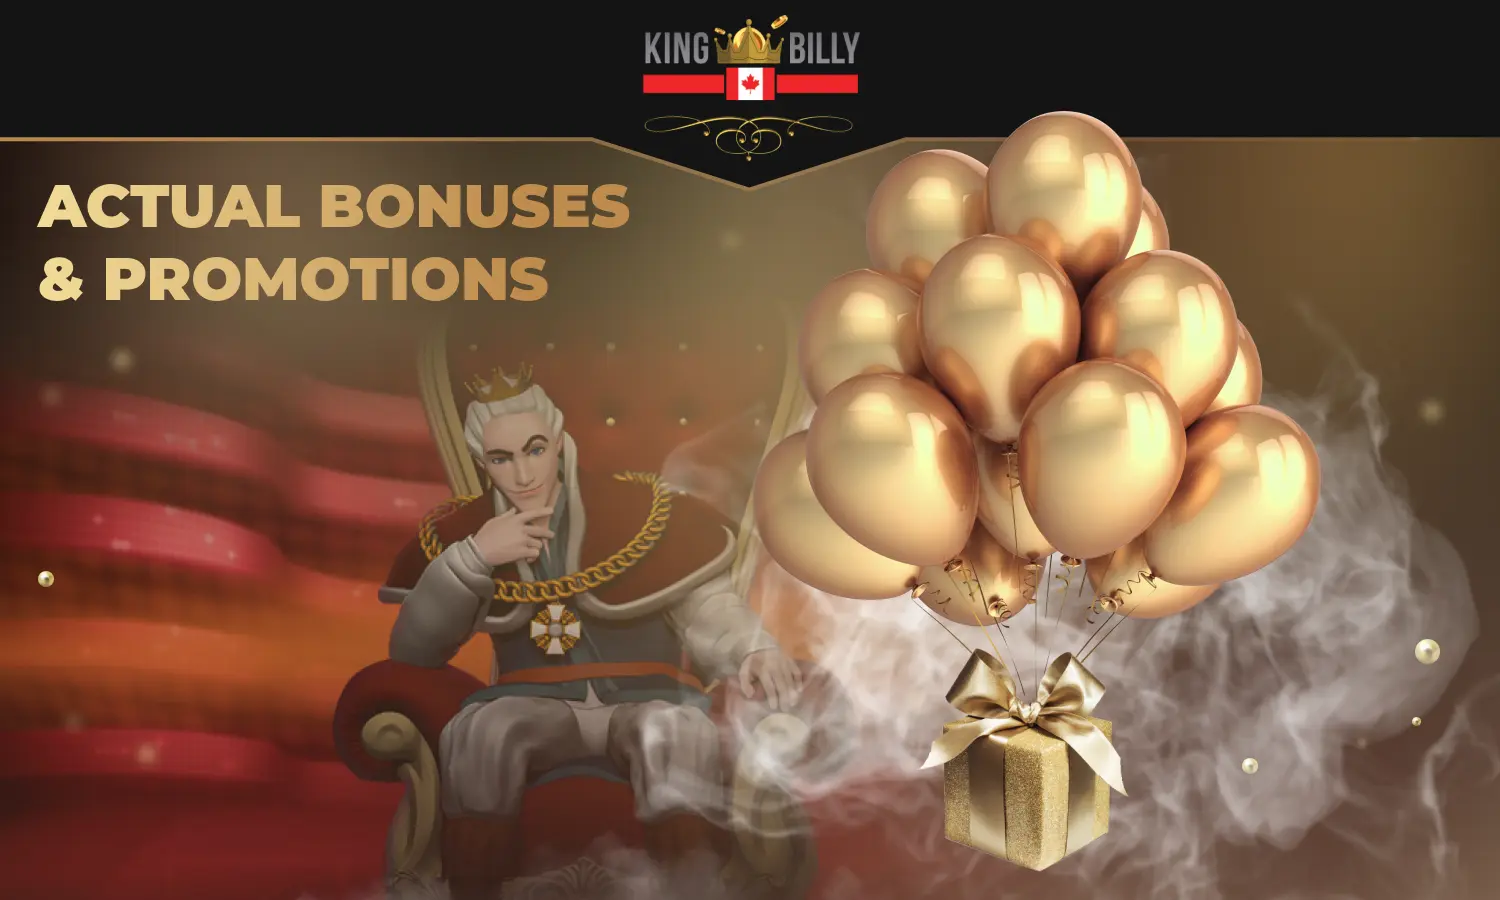 King Billy casino has many exciting promotions to help canadian users have the best gaming experience